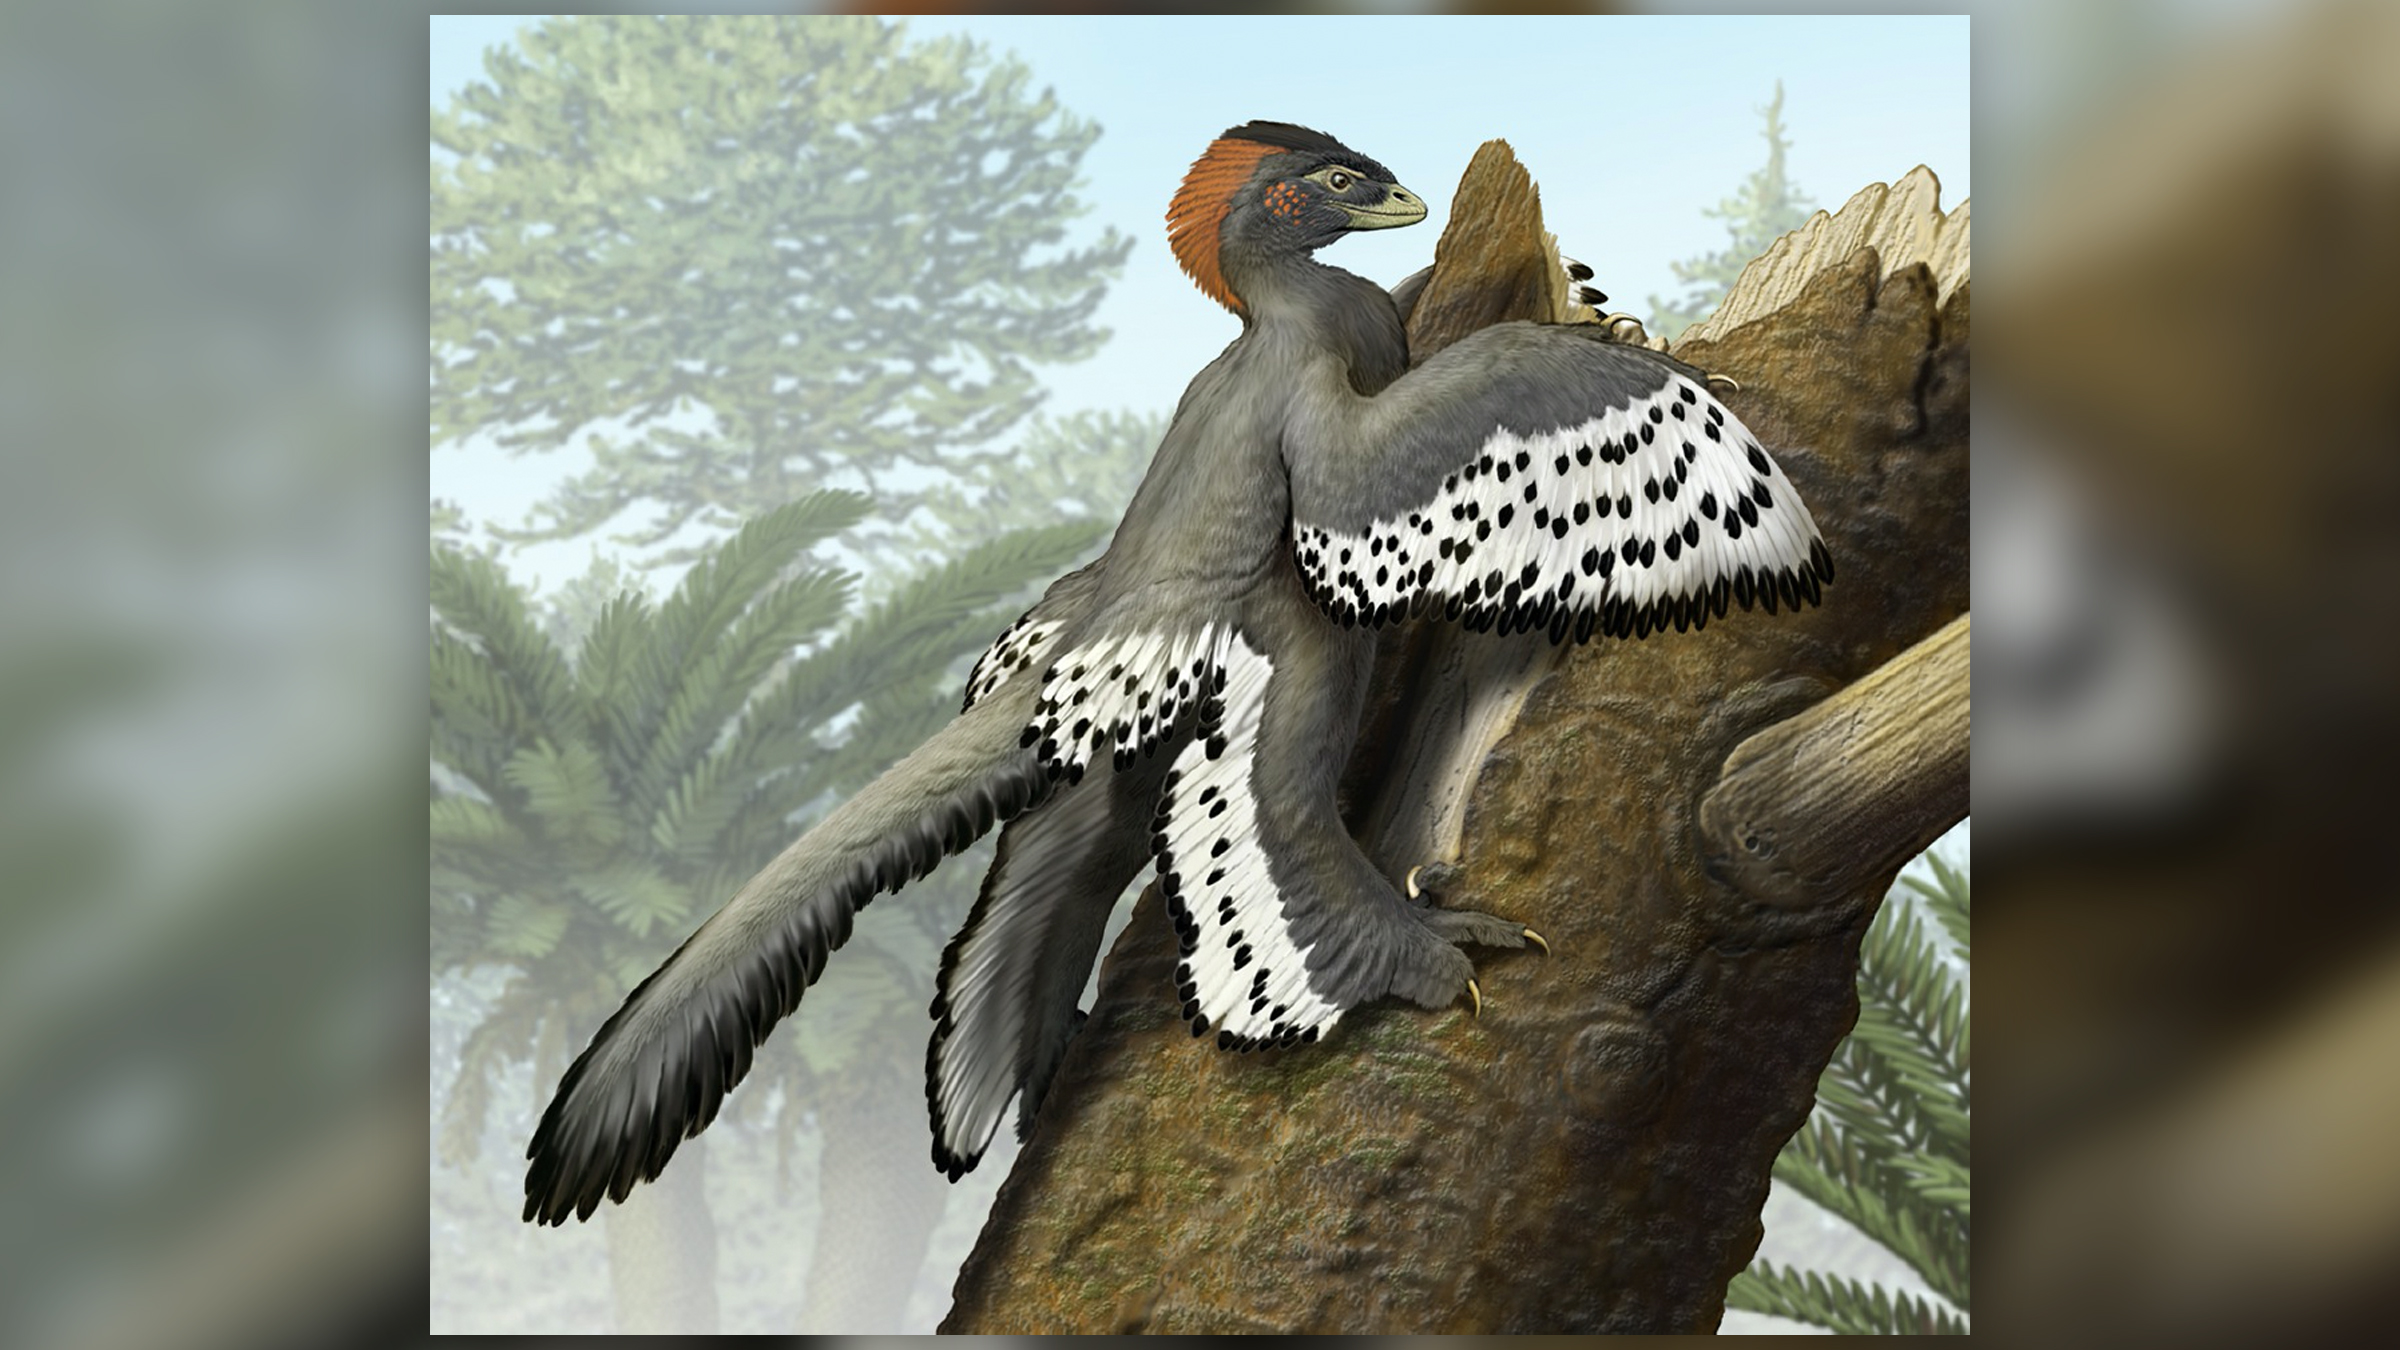 The crow-size Anchiornis had black and white wings and a red crest atop its head when it was alive during the Jurassic period.